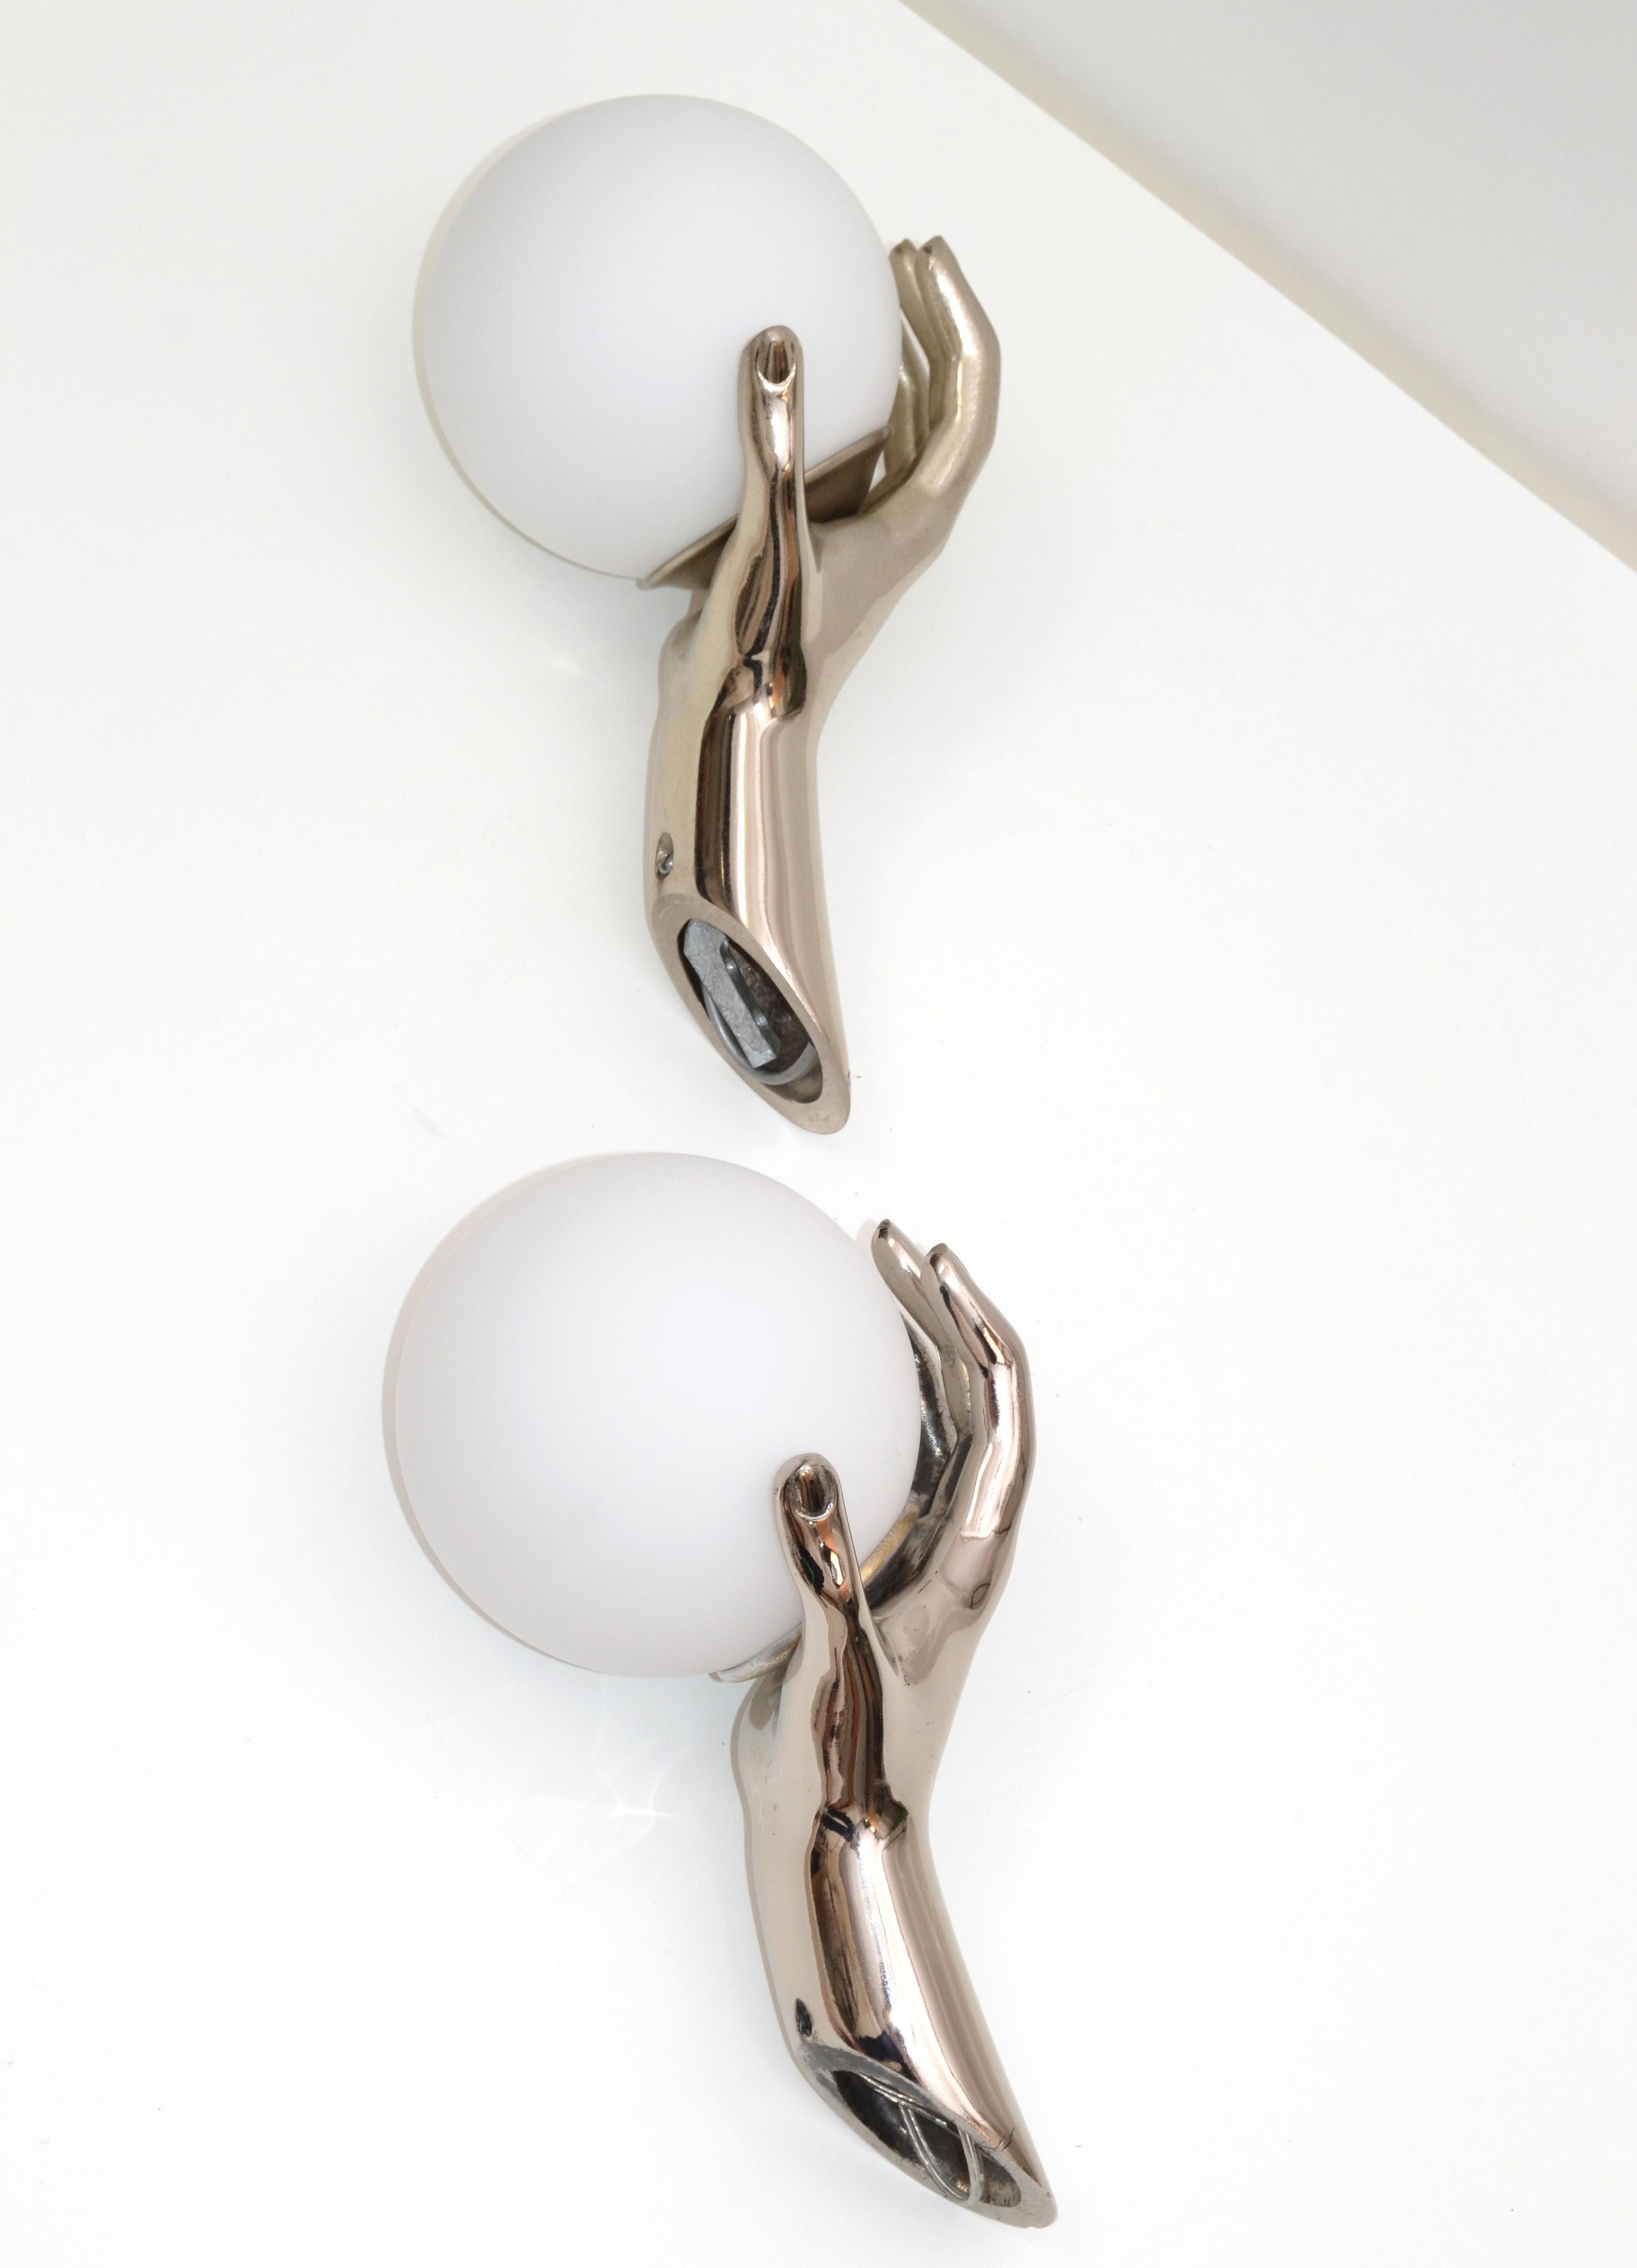 Maison Arlus French Silver Patina Hand Sconces and White Opaline Shades, 1970 2